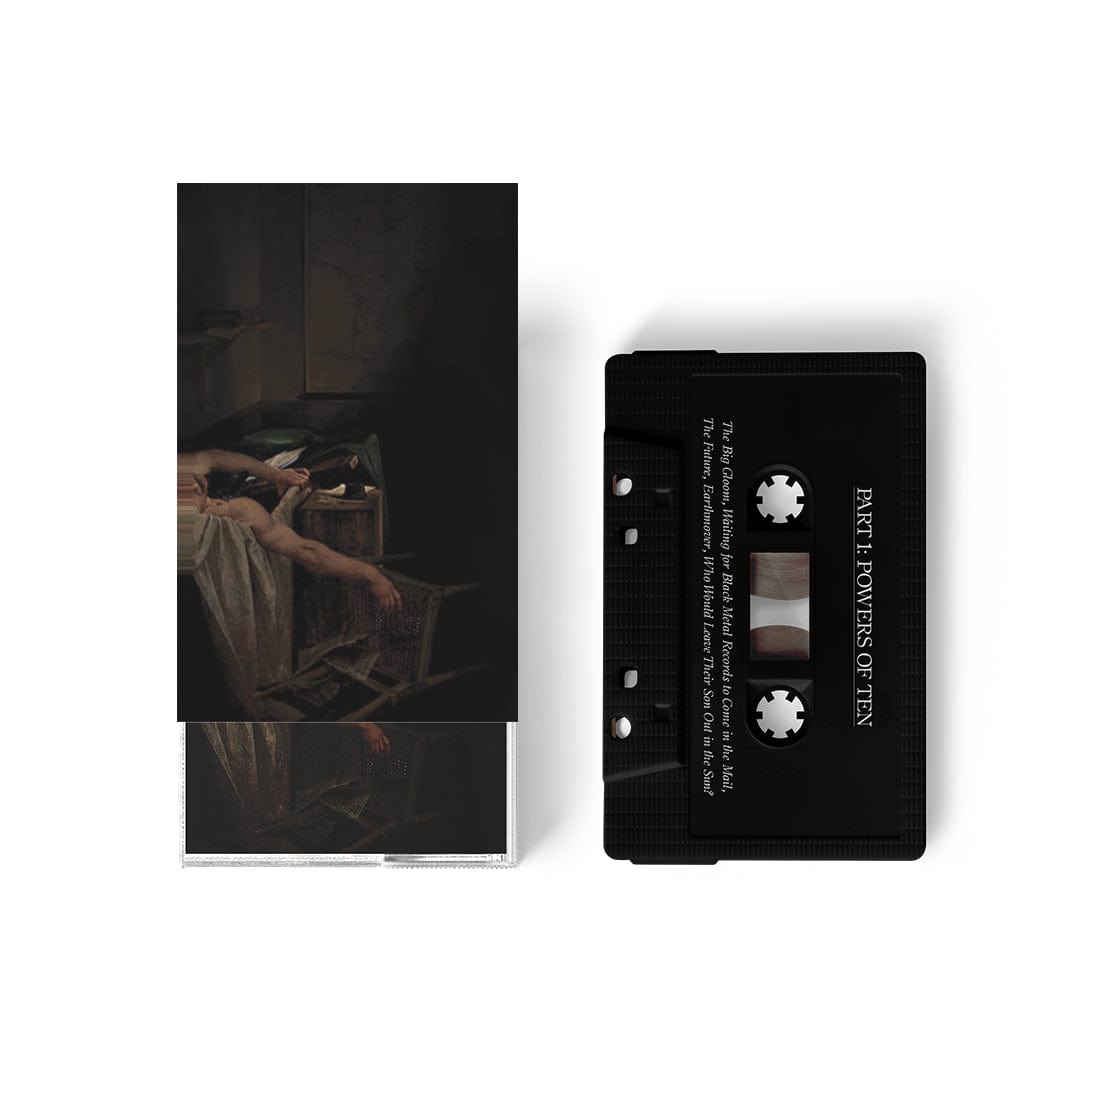 The Flenser Tapes Have a Nice Life "Voids" Tape